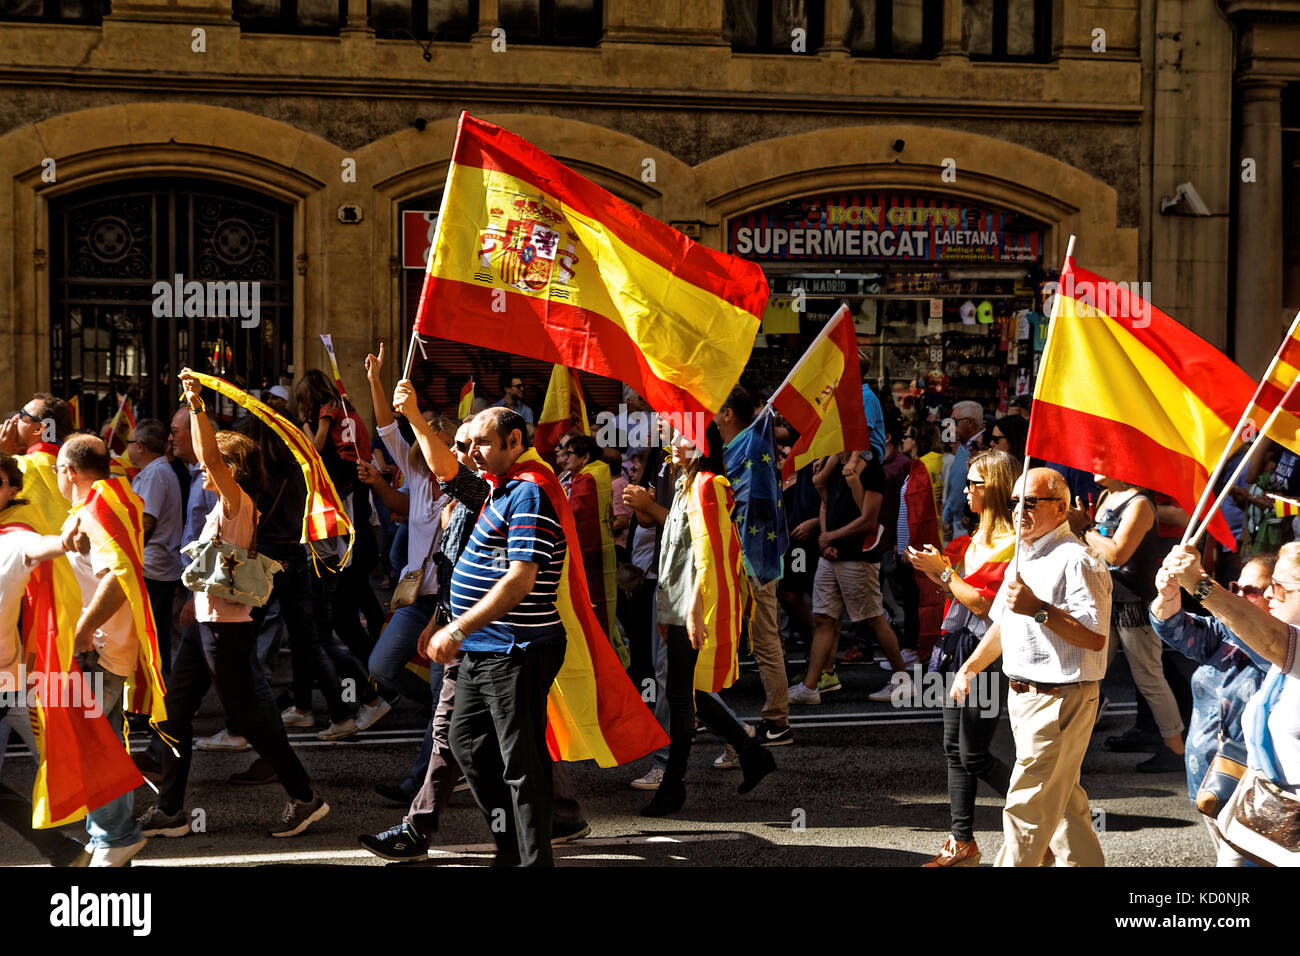 Barcelona, Catalonia, Spain. 08th October 2017. Some demonstrators waving spanish flags. Nearly 900.000 people attend the anti-independence manifestation in Barcelona, organised by Societat Civil Catalana, the most important pro-unity organisation.This can be considered a very great success for the anti-independent movement. All kind of people, including seniors, families, couples and children demonstrated pacifically against independence of Catalonia near by the Estacion de Francia Railway station. Karl Burkhof/Alamy Live News Stock Photo